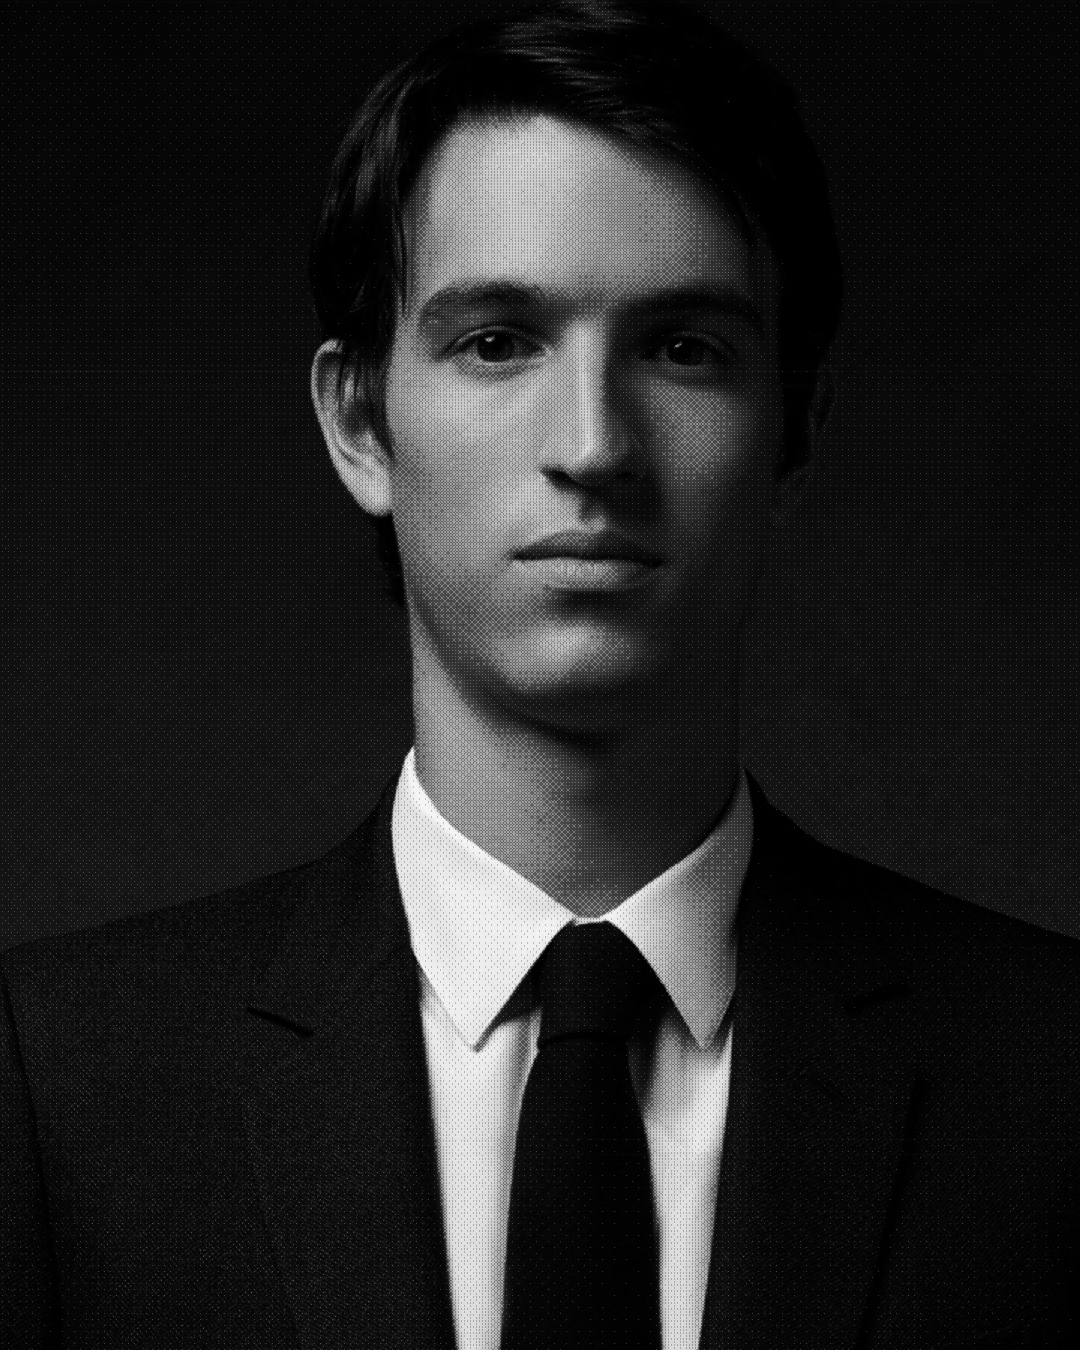 Alexandre Arnault, vice president of Tiffany & Co. in the Products